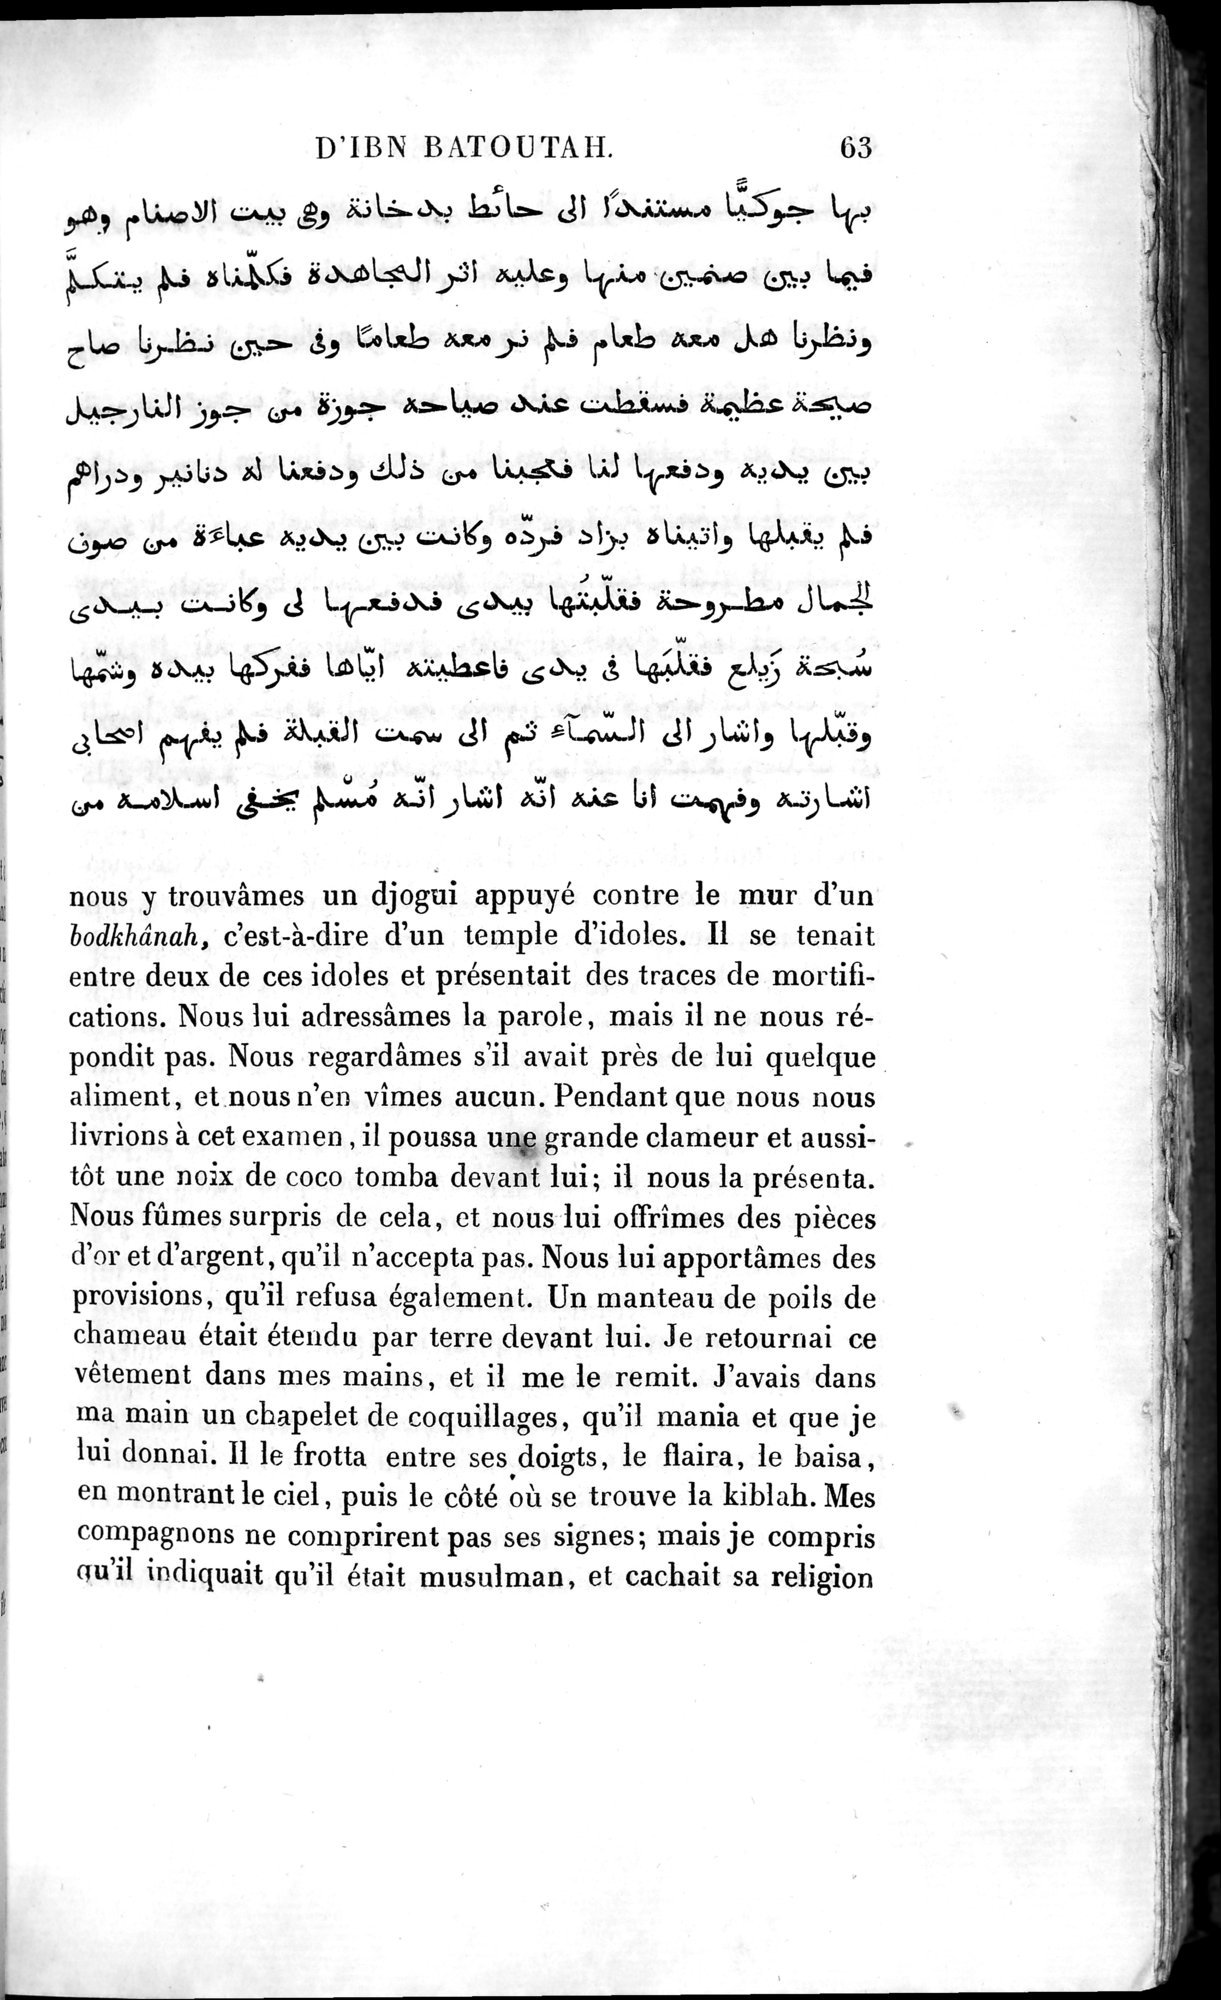 Voyages d'Ibn Batoutah : vol.4 / Page 75 (Grayscale High Resolution Image)